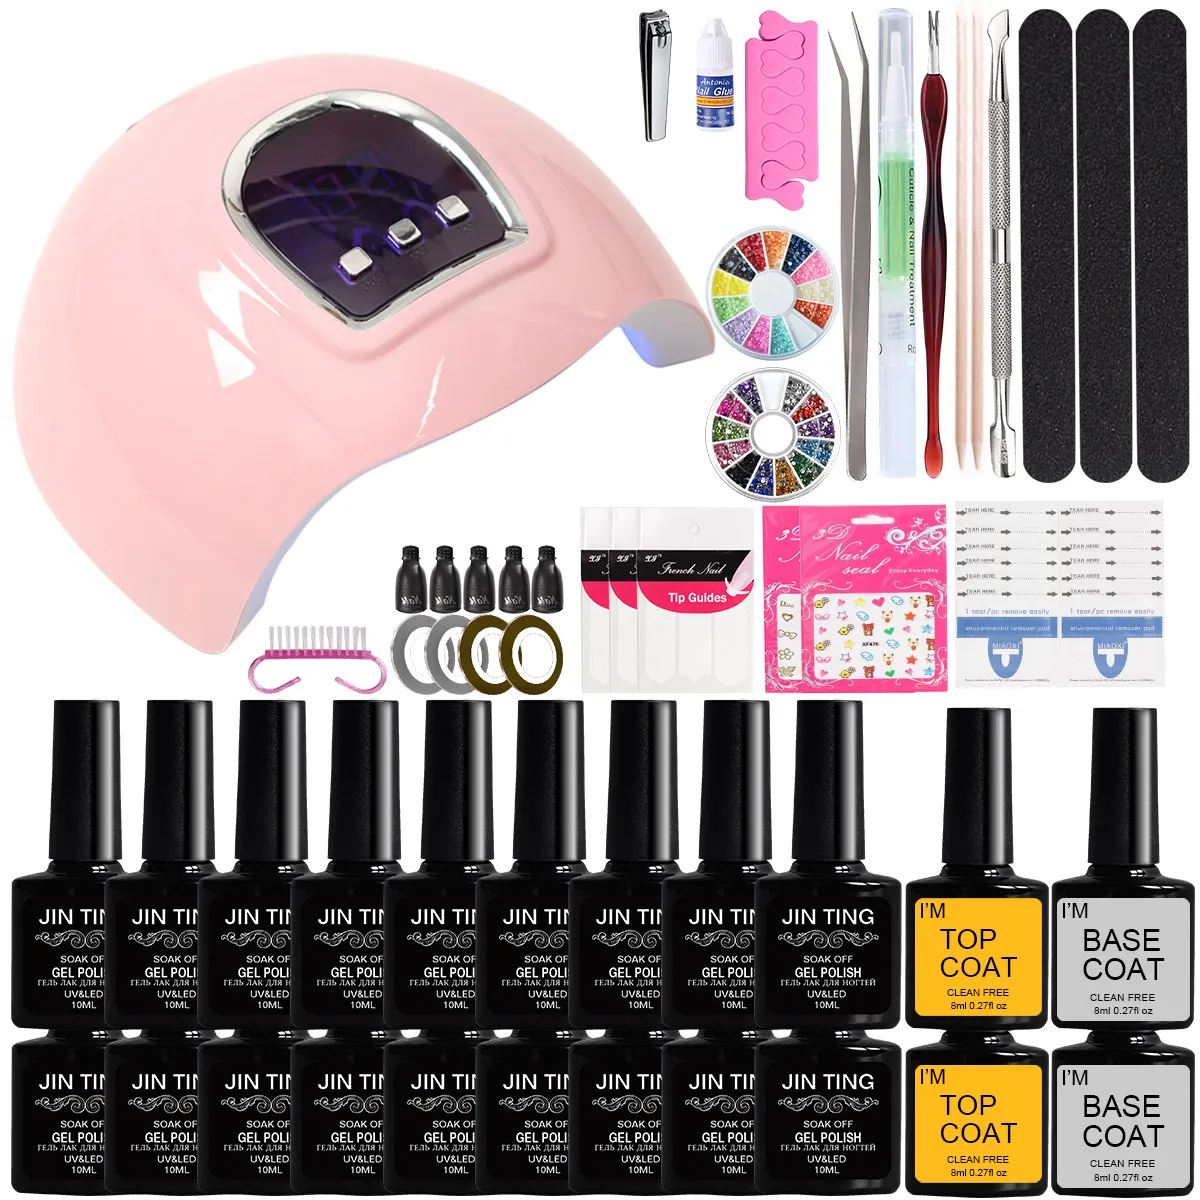 Meetnail Wholesale Cheap Uv Gel Nail Supplies For Professionals Kit  Equipmentwholesale 60 Colors Nail Polish Gel Setel S - Buy Nail Supplies  For Professionals Kit Acrylic,Gel Polish Set,Sets Kits Product on  